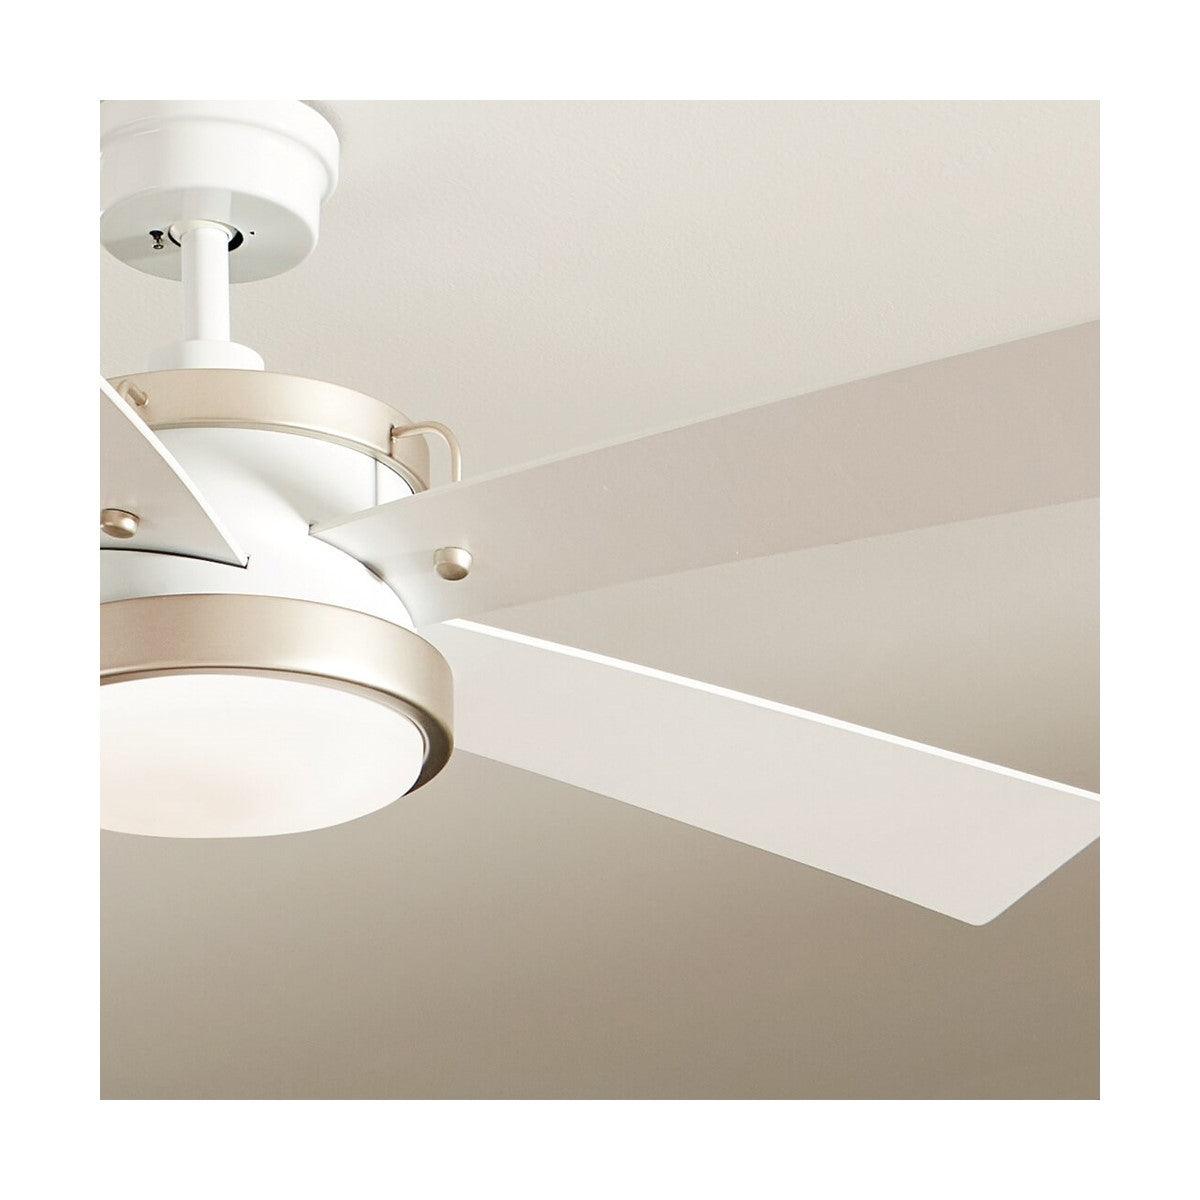 Salvo 56 Inch Modern Propeller Ceiling Fan With Light And Wall Control - Bees Lighting